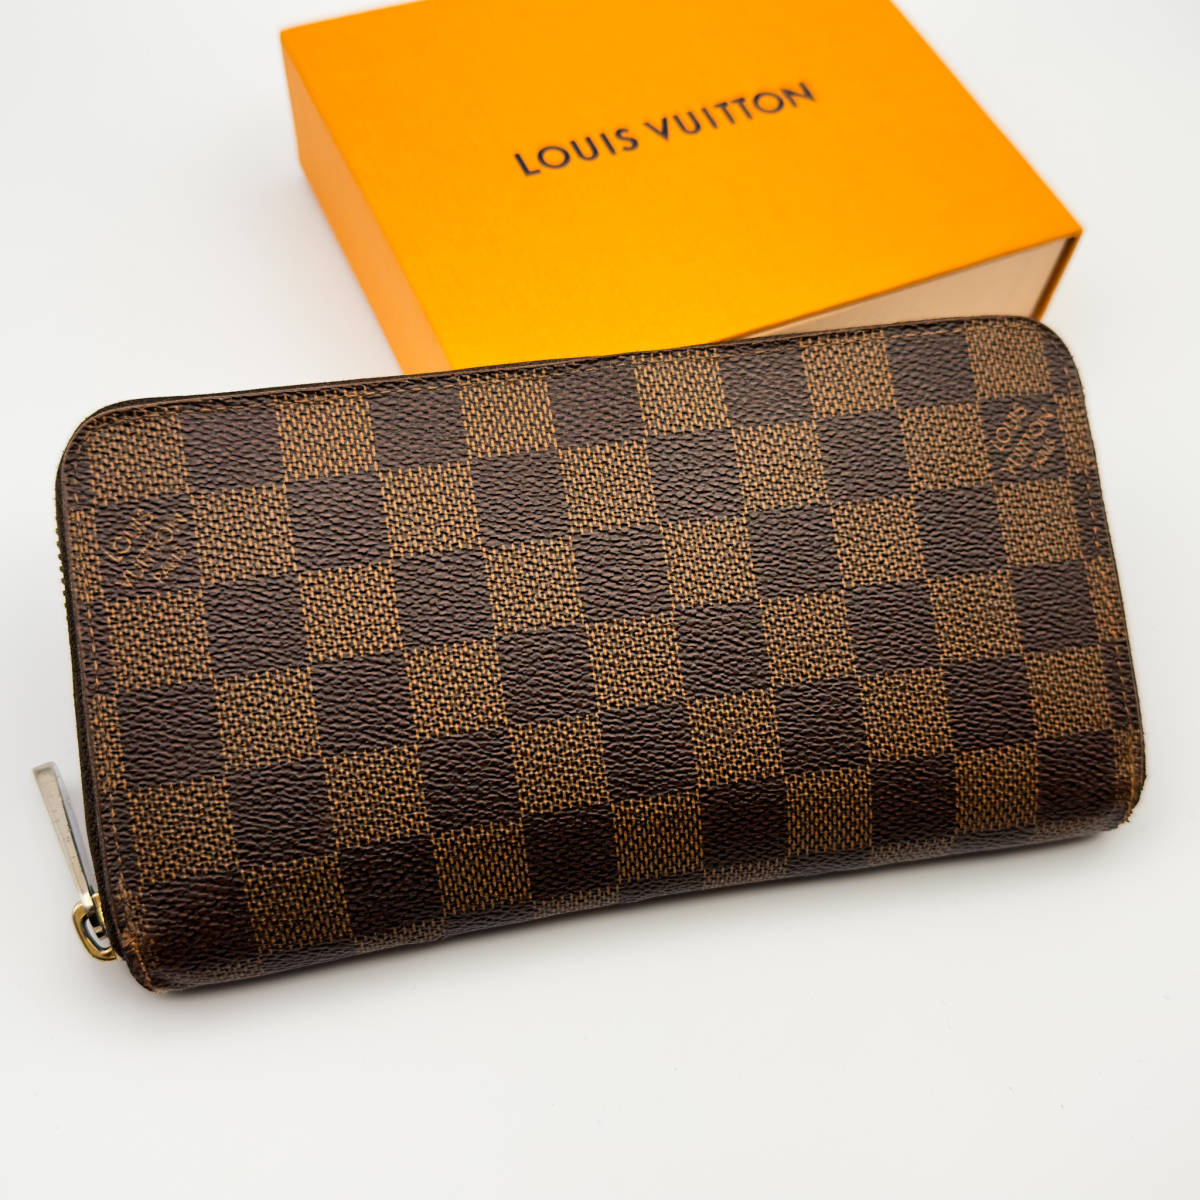 LOUIS VUITTON ルイヴィトン ダミエ ジッピーウォレット